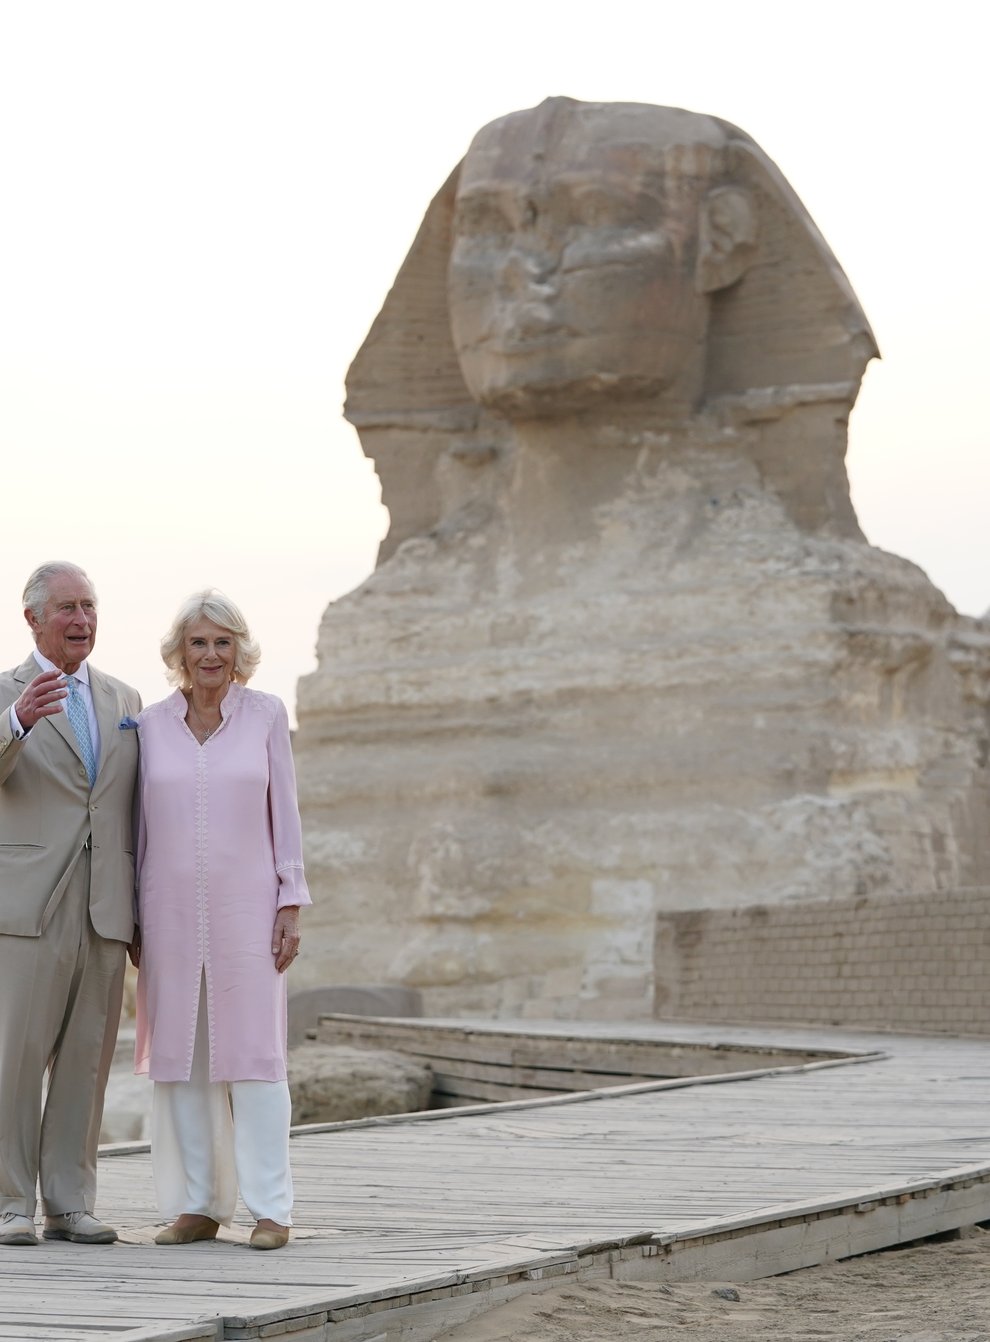 The Prince of Wales and the Duchess of Cornwall during a visit to the Great Sphinx of Giza, Egypt (Joe Giddens/PA)